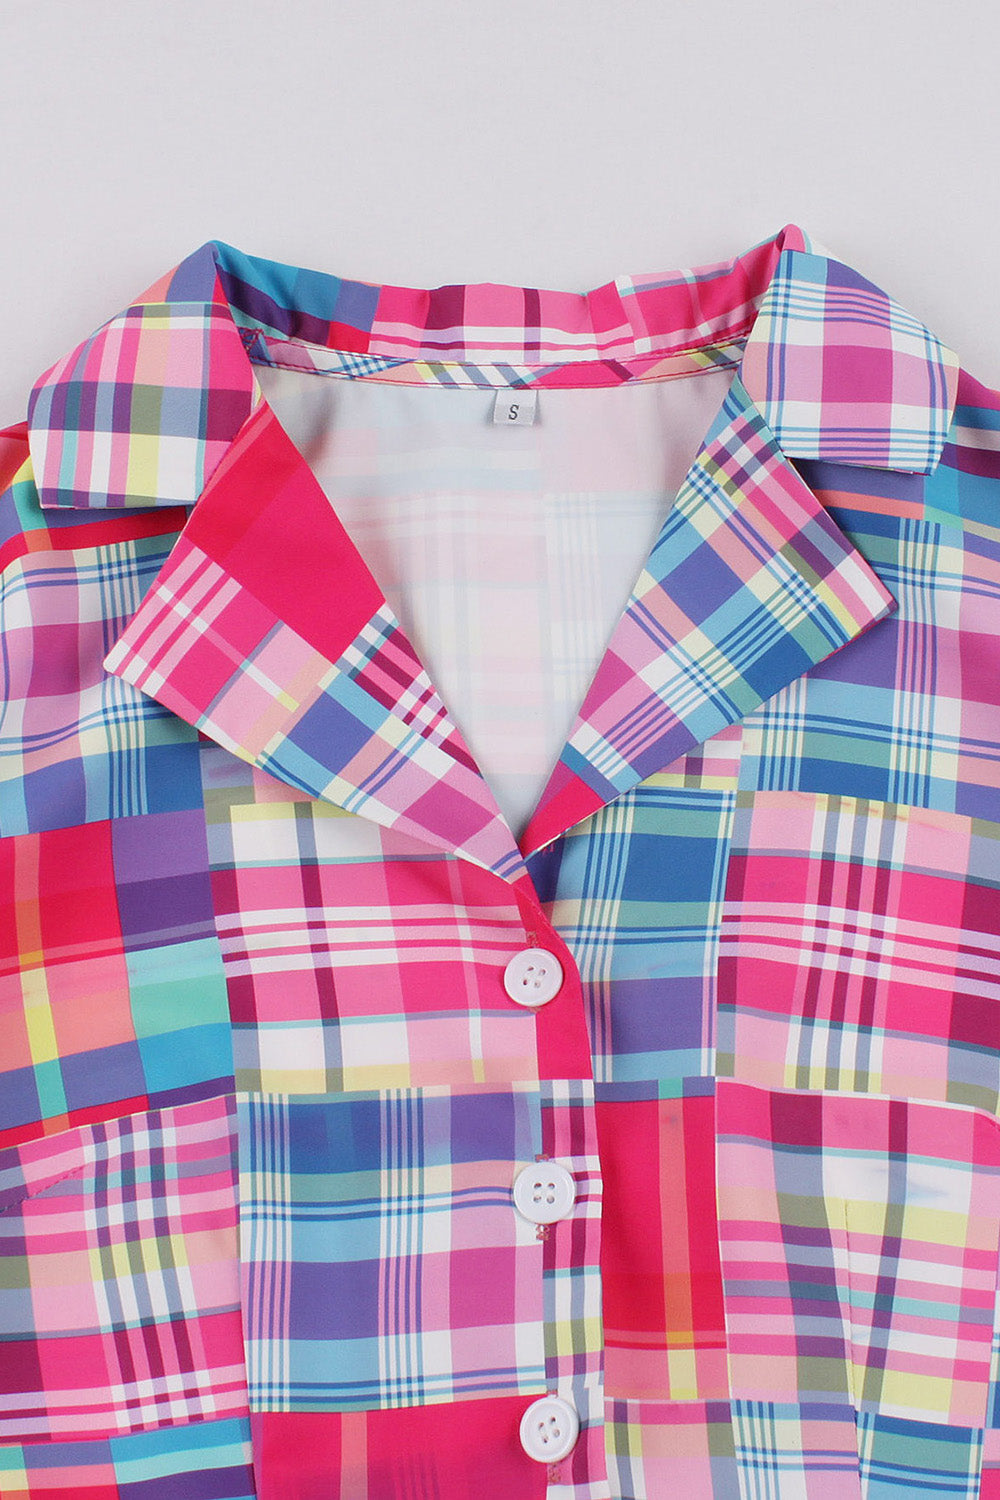 Pink Button Half Sleeves Plaid 1950s Dress